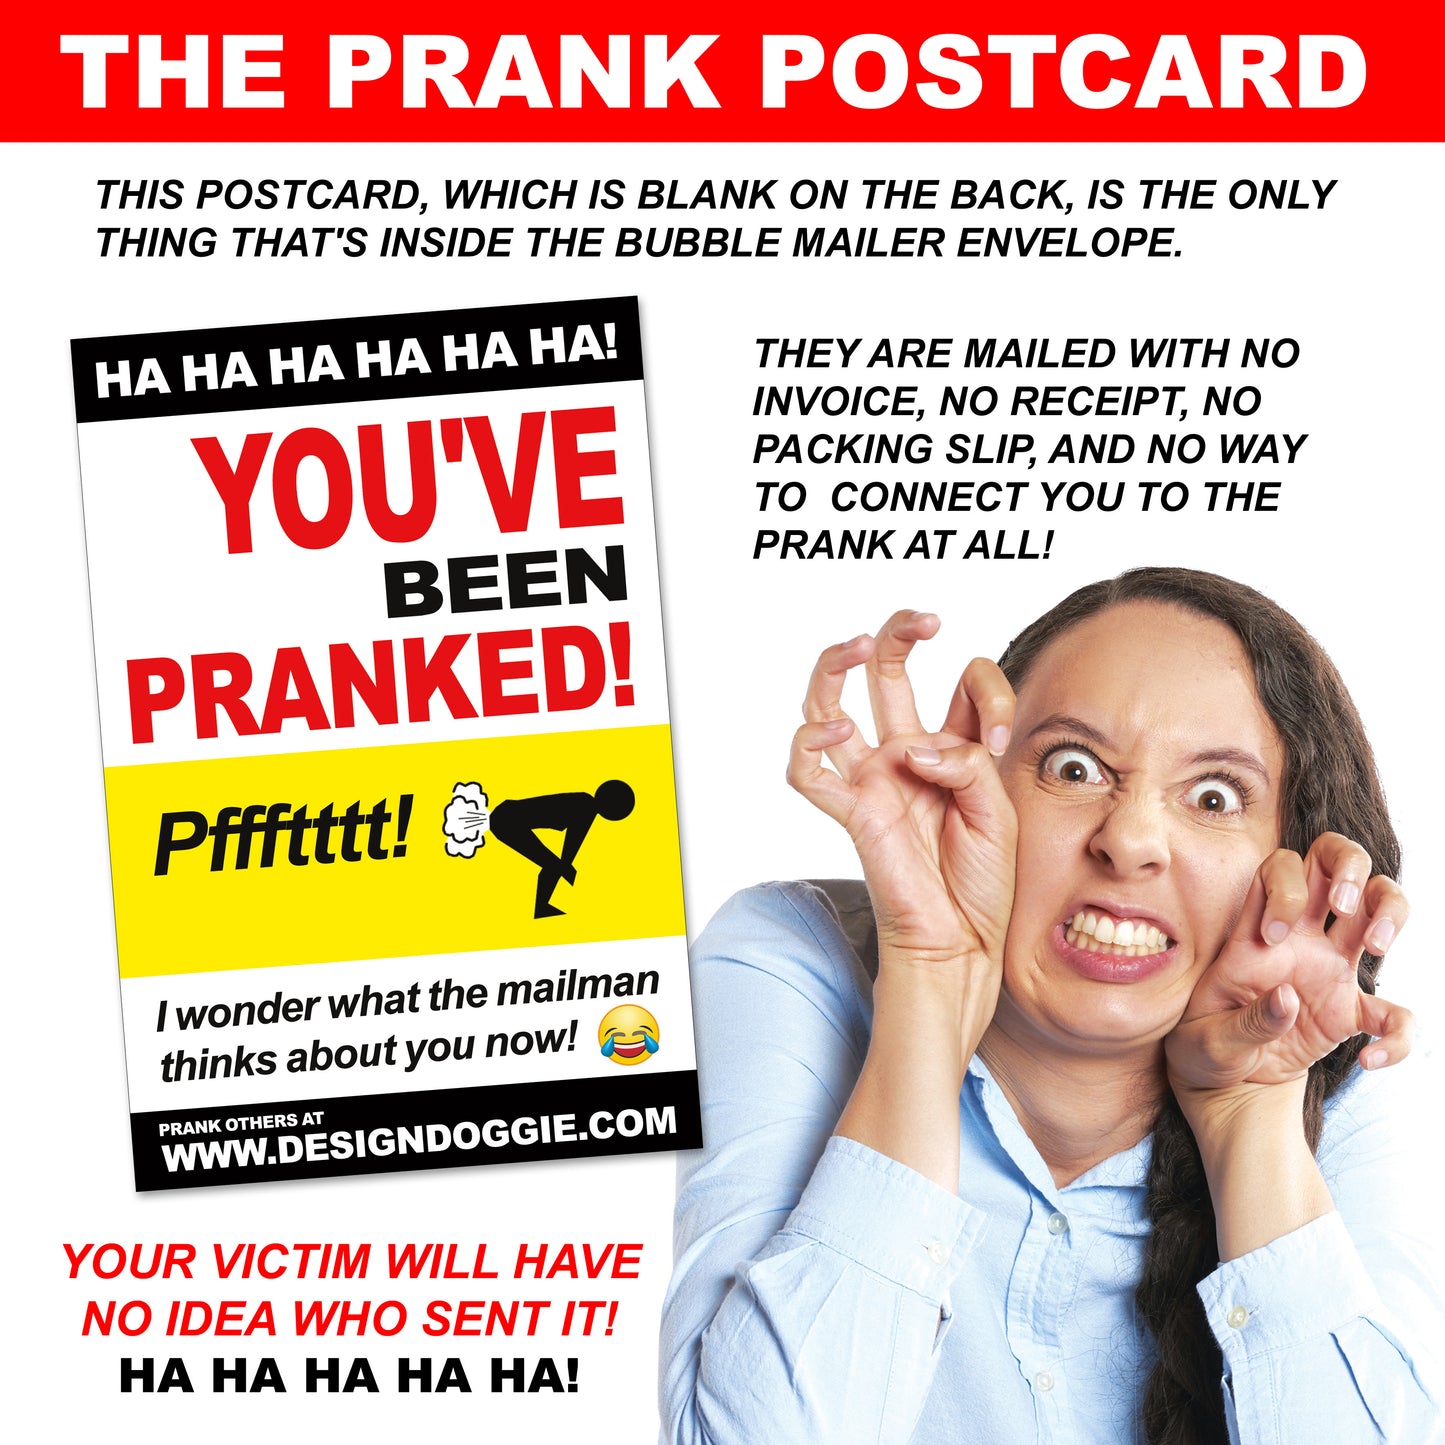 Lady Shart Wipes embarrassing prank envelope gets mailed directly to your victims 100% anonymously!